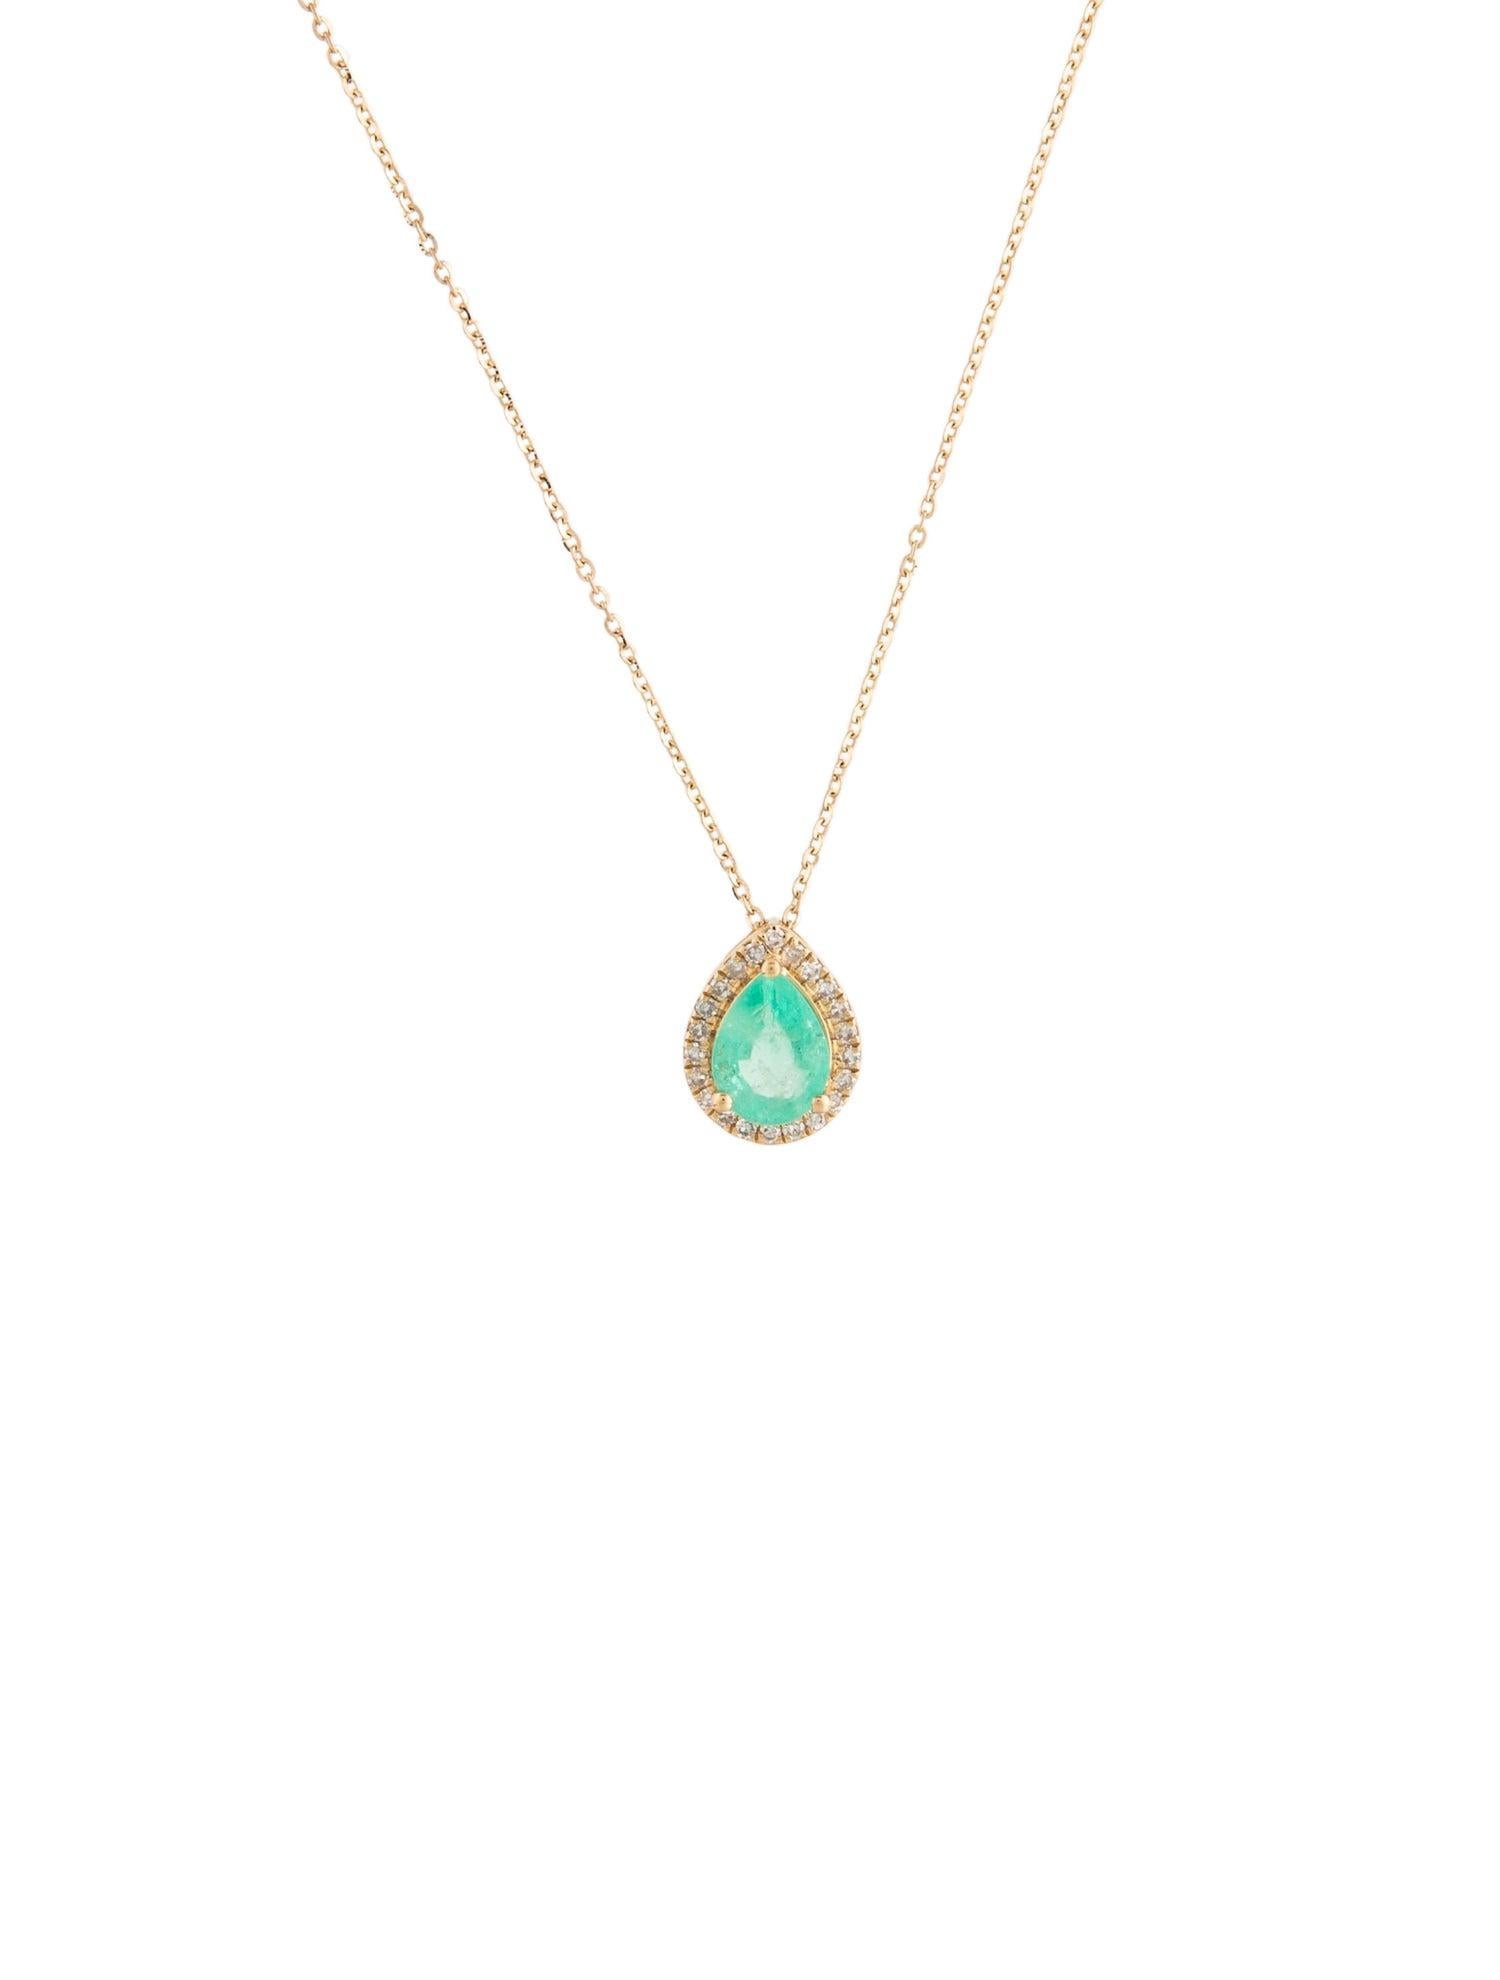 Immerse yourself in the enchanting world of our Forest Ferns collection with this exquisite pendant. Crafted with precision and adorned with nature's finest treasures, it captures the essence of lush, verdant forests.

The focal point of this